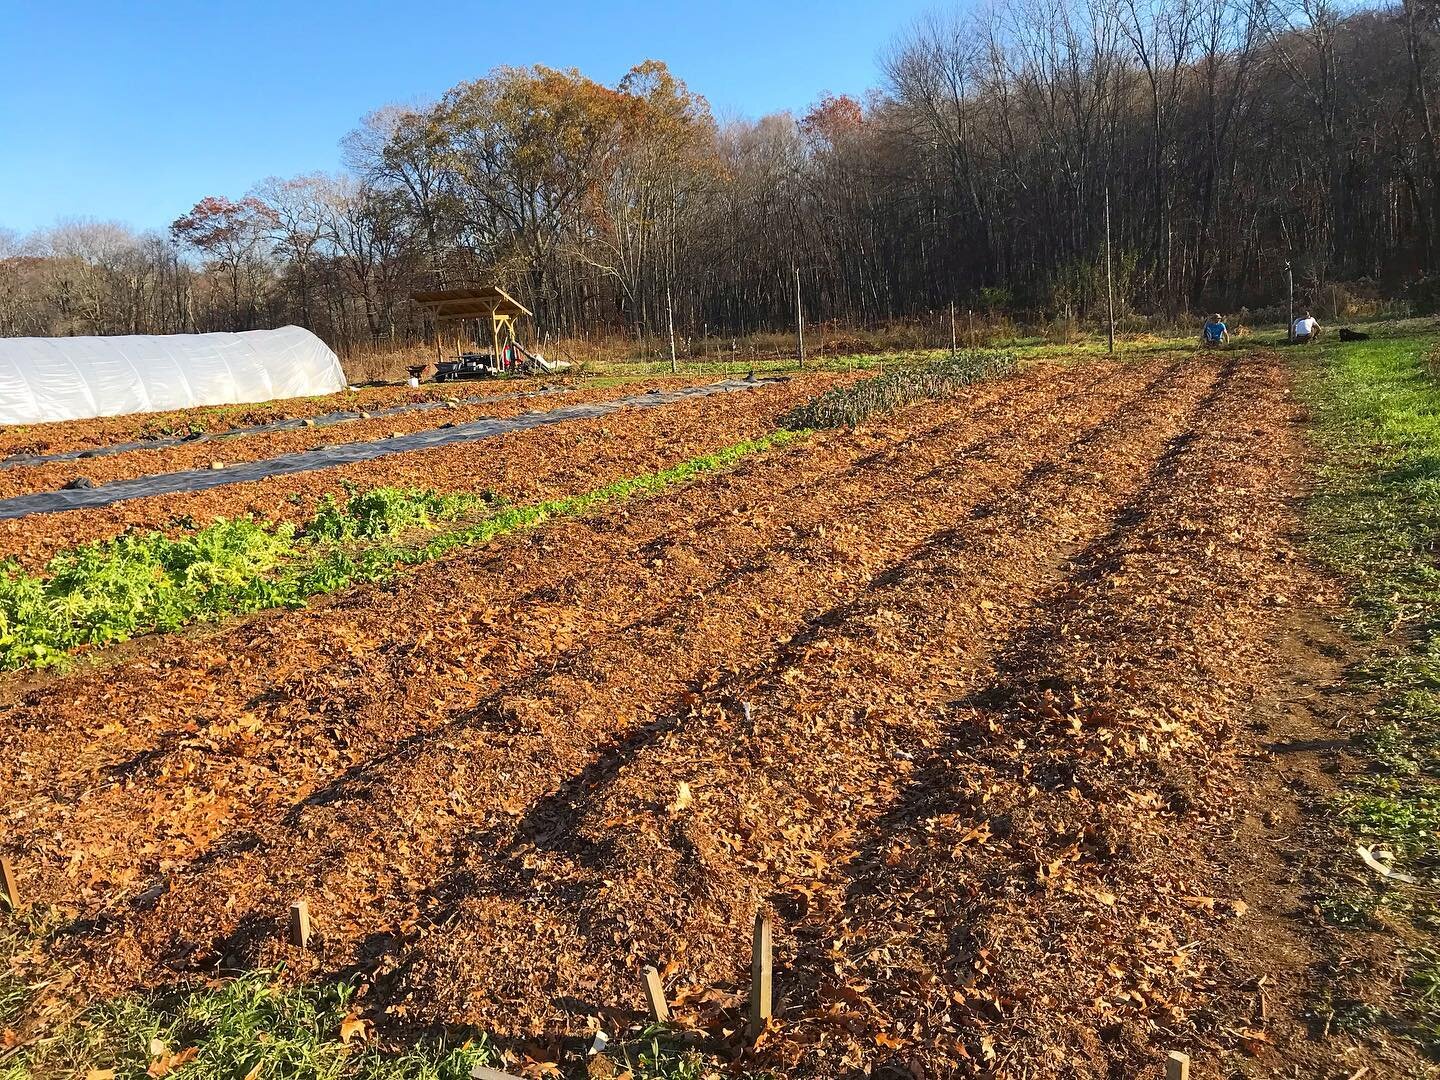 Getting everything tucked in under some @earthcarefarm_ri compost and leaves from Brown University. A very pleasant time of year as we get to tend to ourselves and the soil. 🍁 🛏